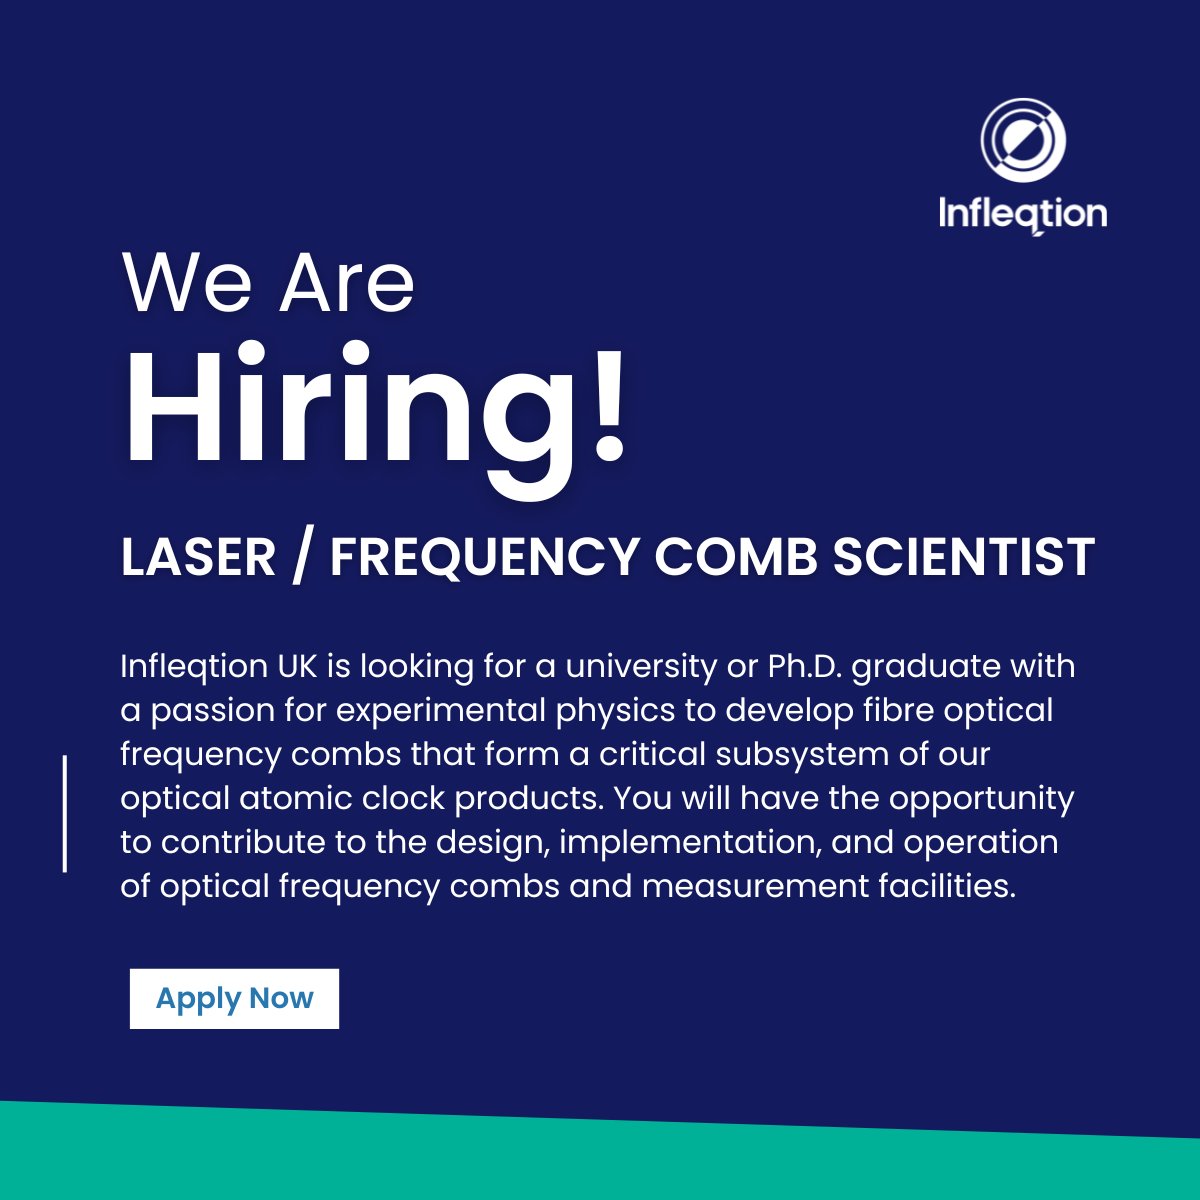 We are looking for a Laser or Frequency Comb Scientist to join our team in Oxford: lnkd.in/gVppA5RP
#QuantumTechnology #QuantumScience #JobOpportunity #PhysicsJobs #OxfordJobs #JoinOurTeam #Infleqtion #LaserScience #QuantumCareers